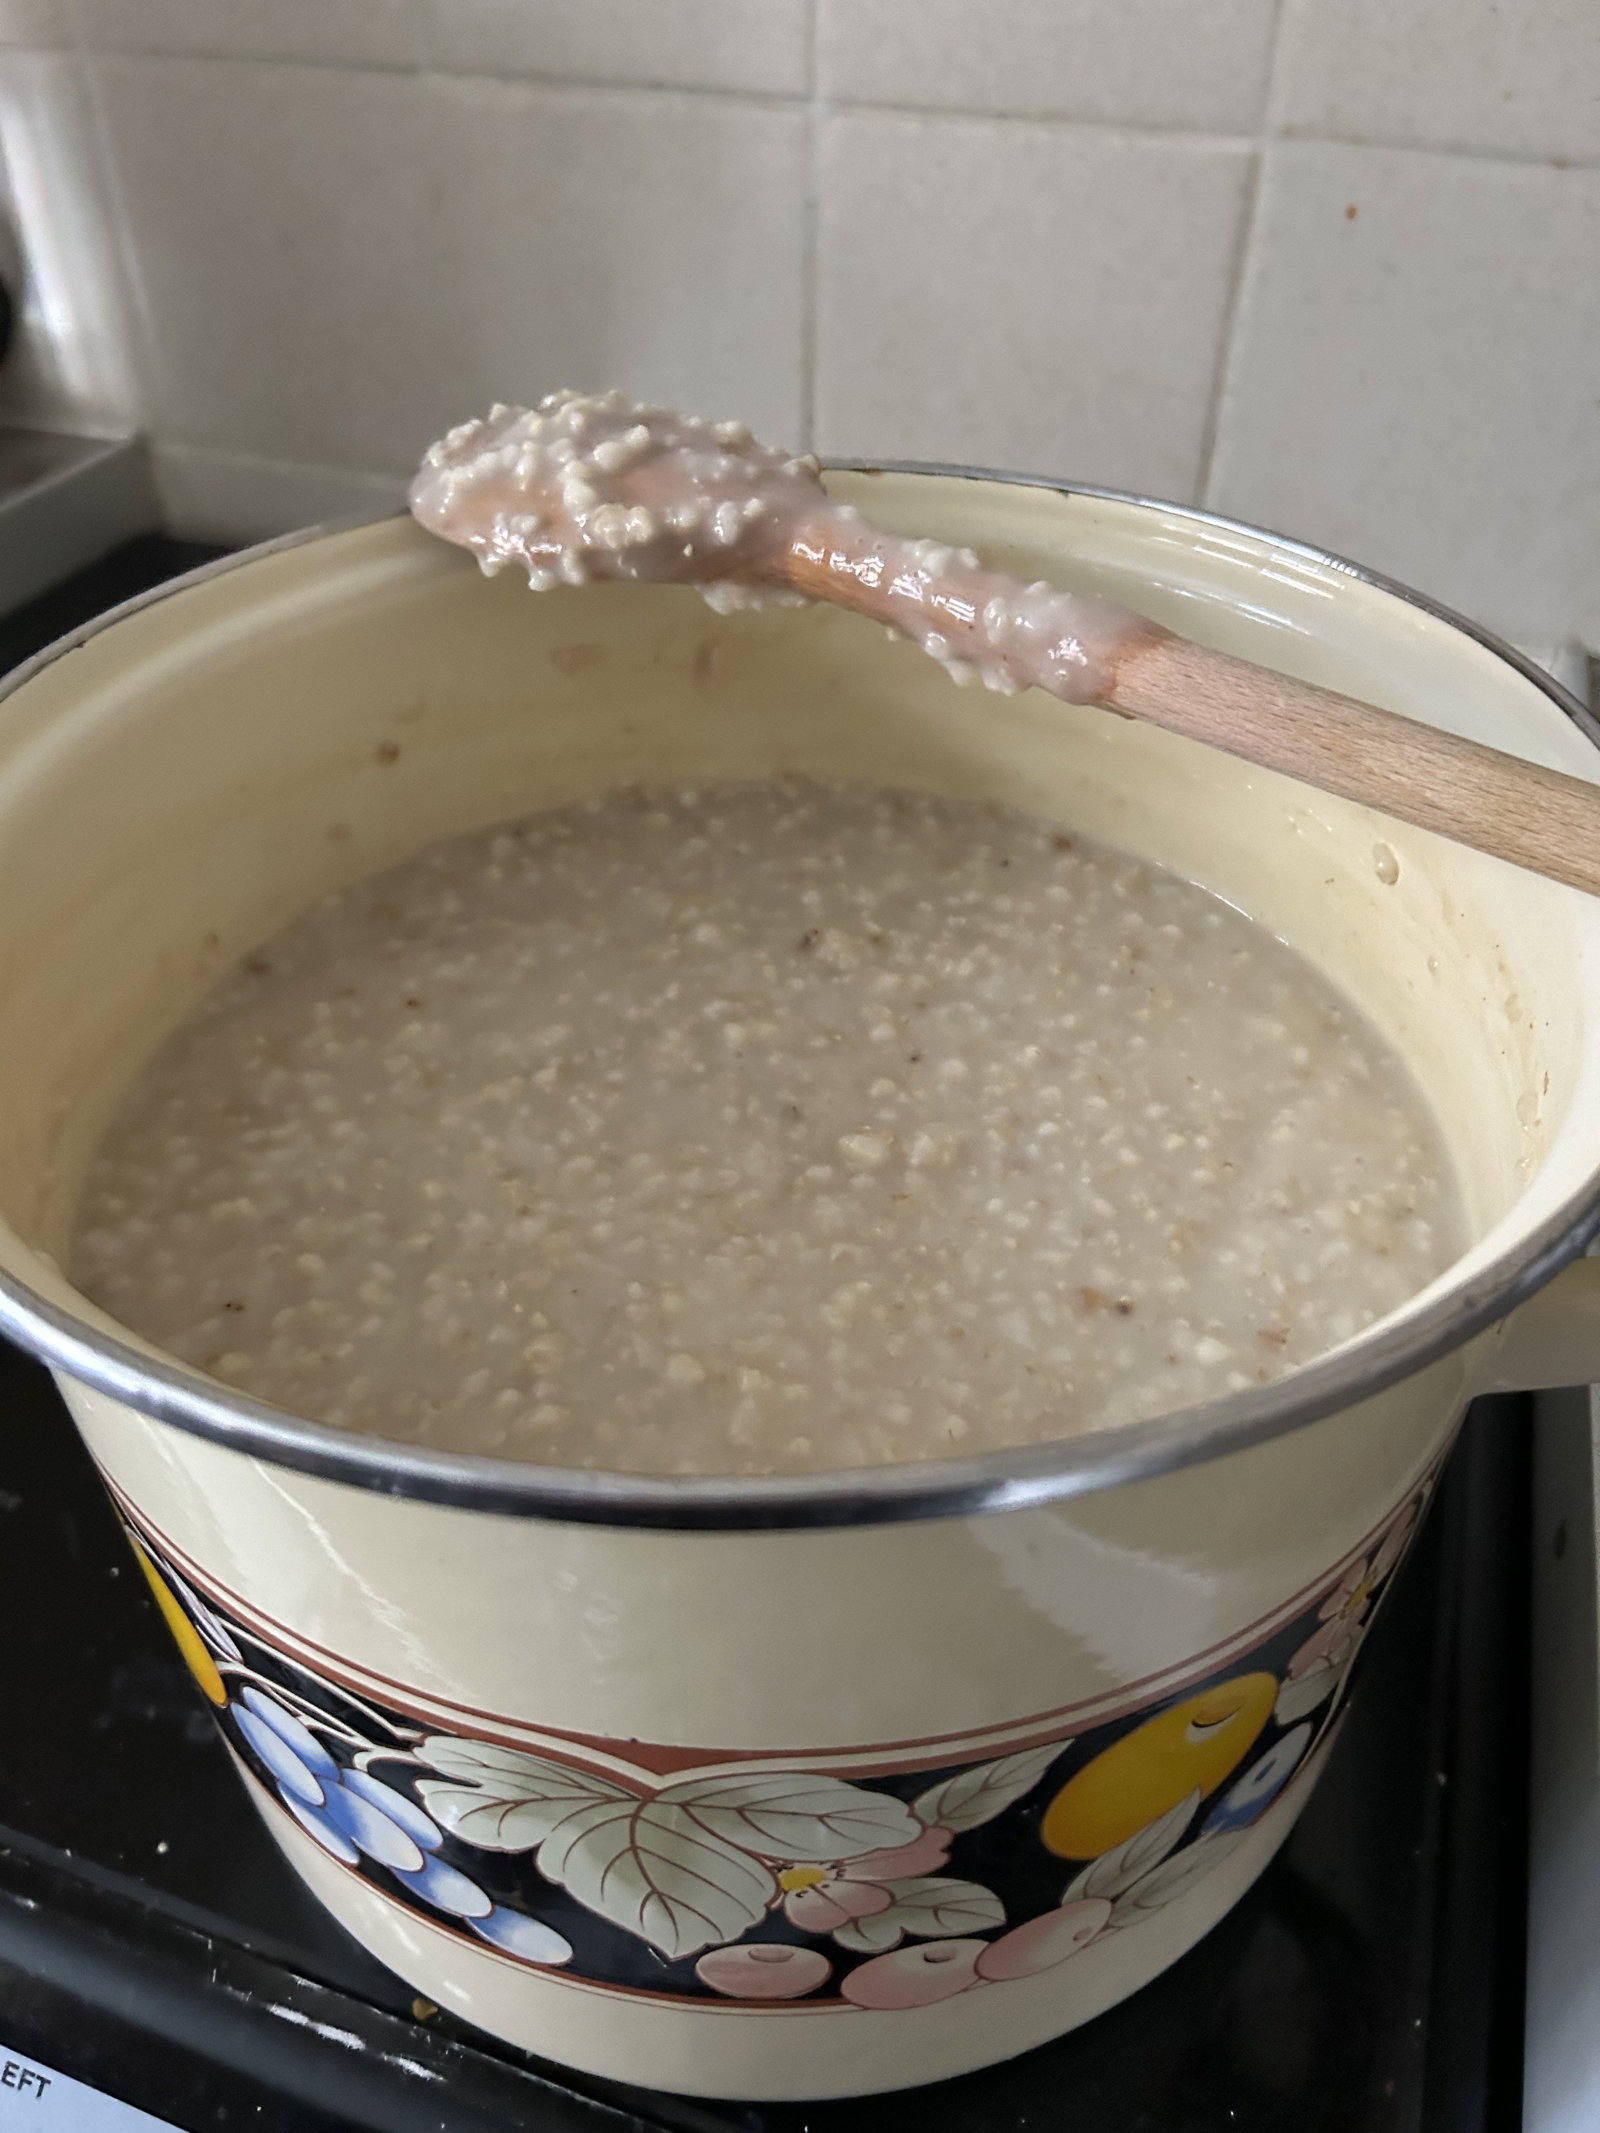 Watch the Photo by MistressMD with the username @MistressMD, who is a star user, posted on March 9, 2024 and the text says 'An early morning start to today, prepping ingredients & whippin up the porridge 🥣
I’m getting fucking good at this 😉💪🏾

Plus a special request to wear the #leathers too… I reckon this is gonna be one super sticky #messy sesh!!! 👸🏾😈💦💦💦

Want..'